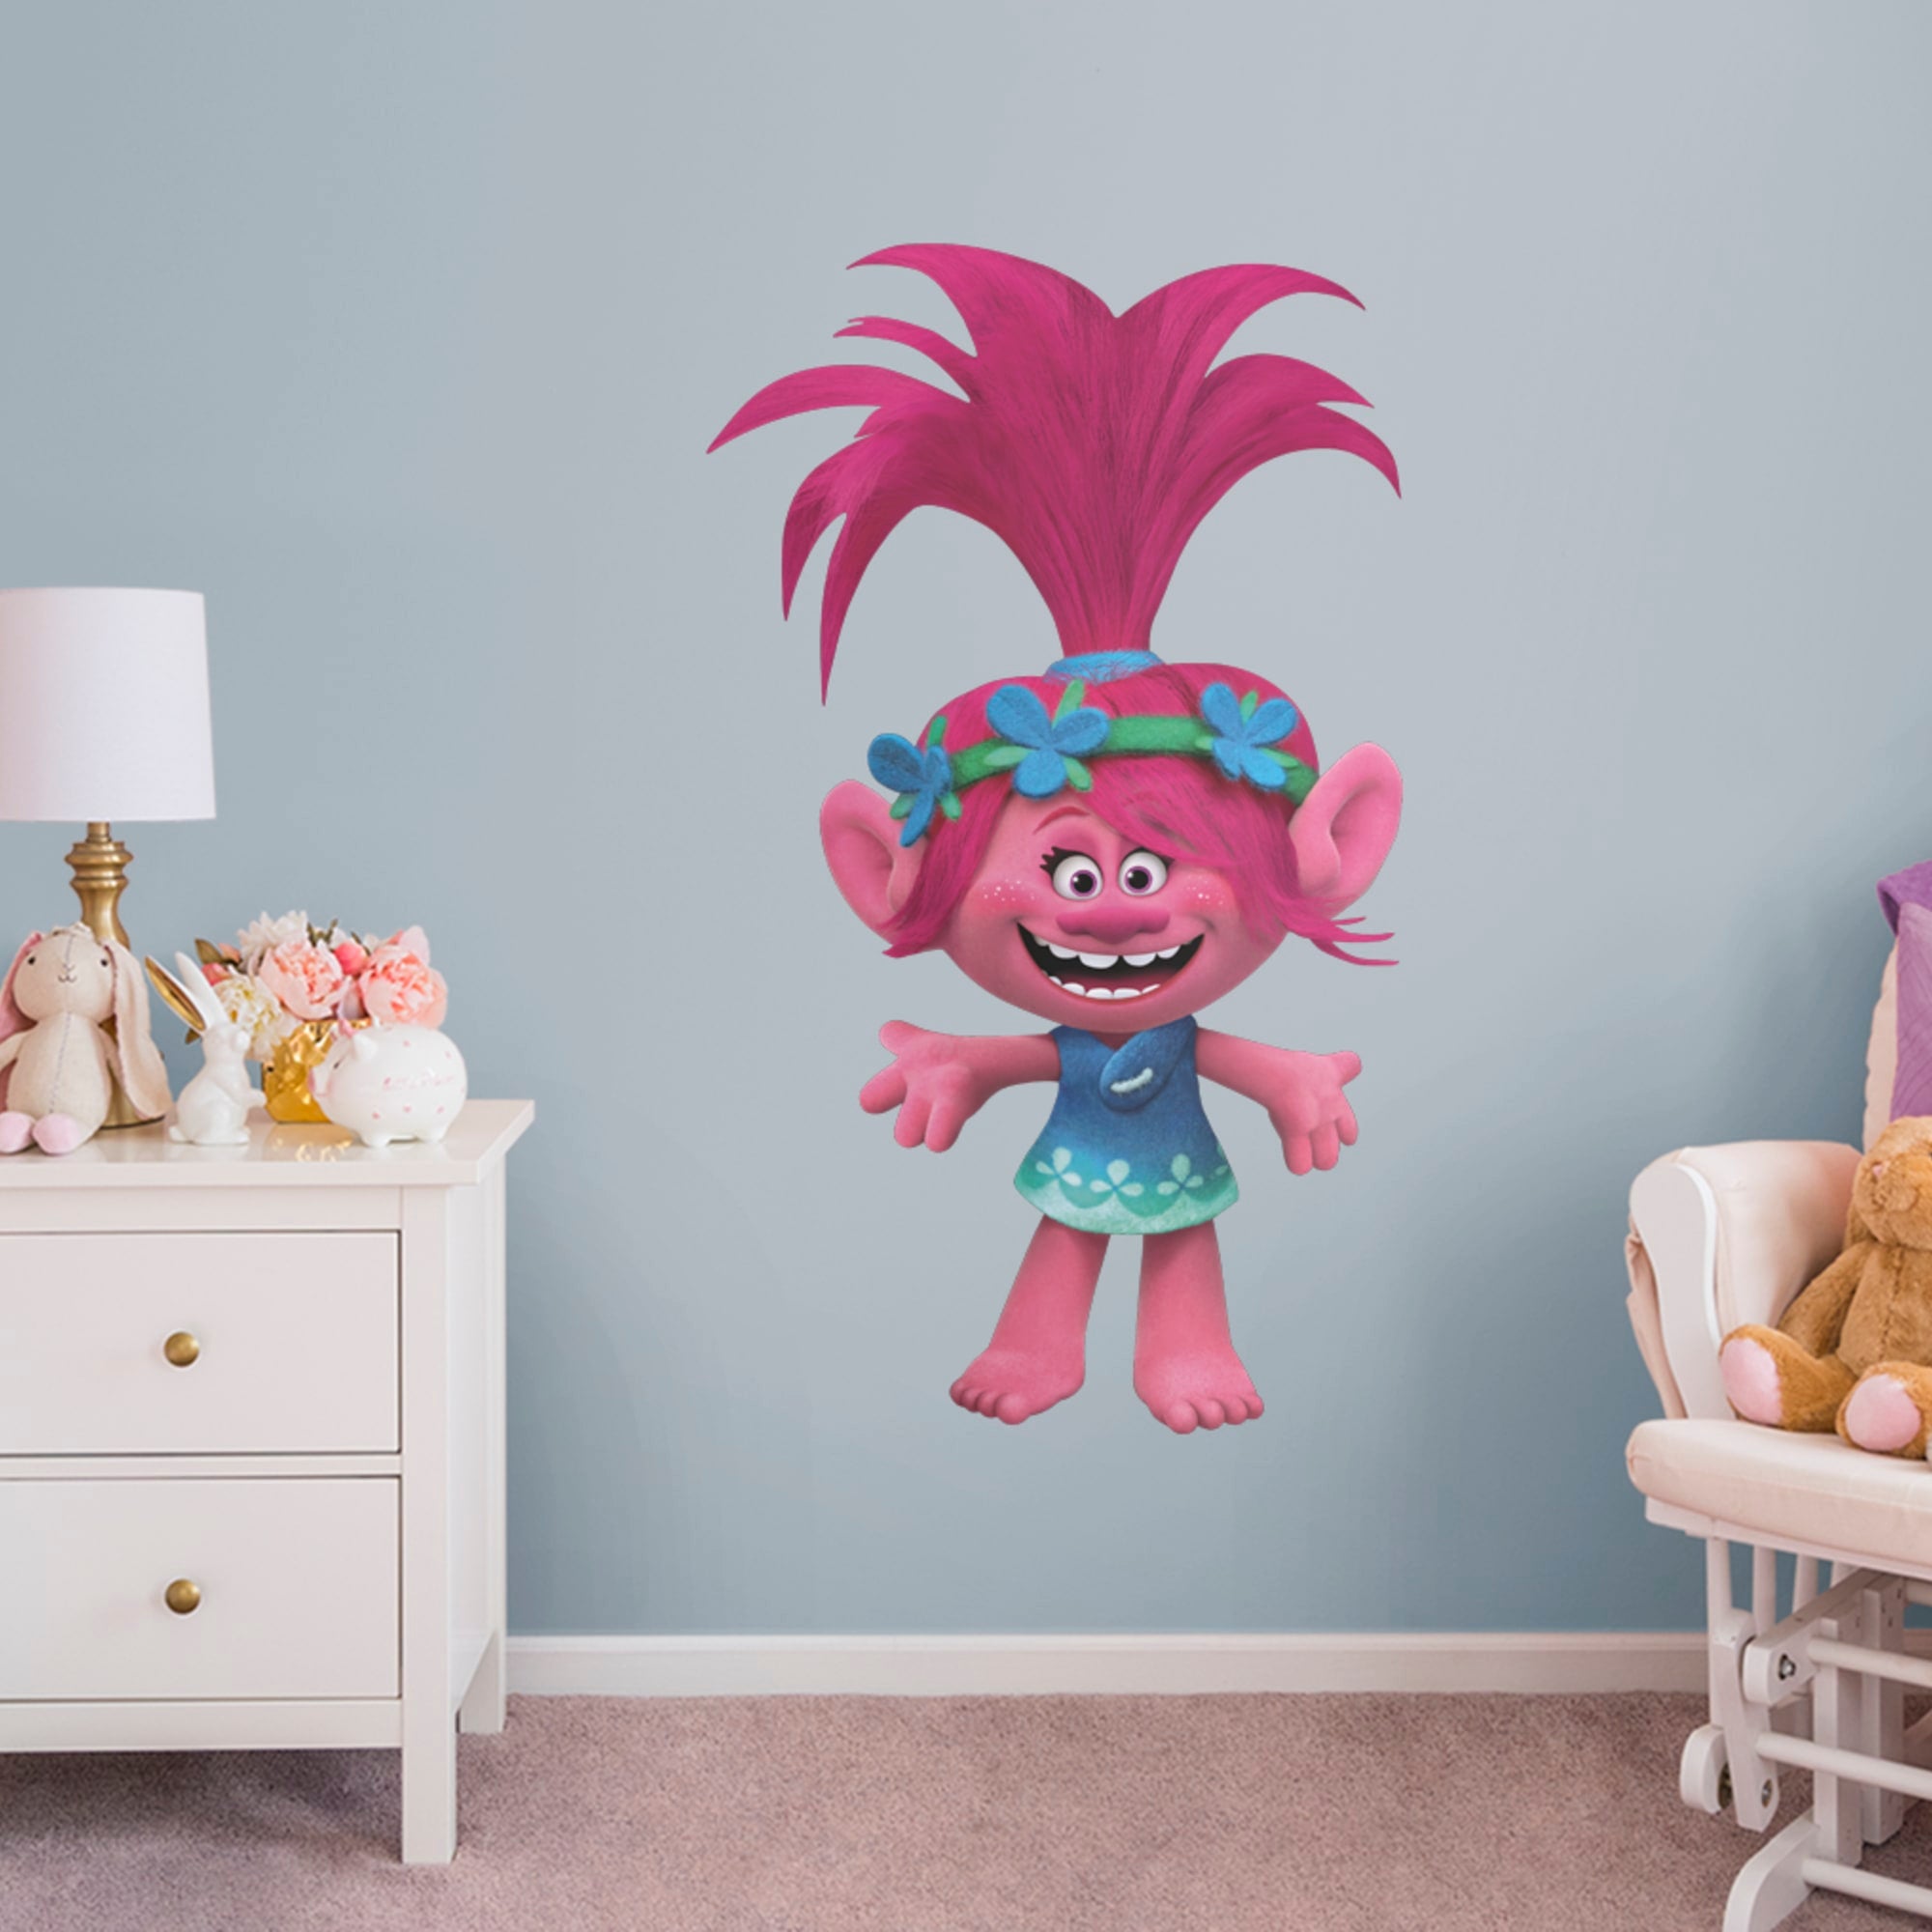 Poppy - Officially Licensed Trolls Removable Wall Decal Giant Character + 7 Decals (30"W x 51"H) by Fathead | Vinyl